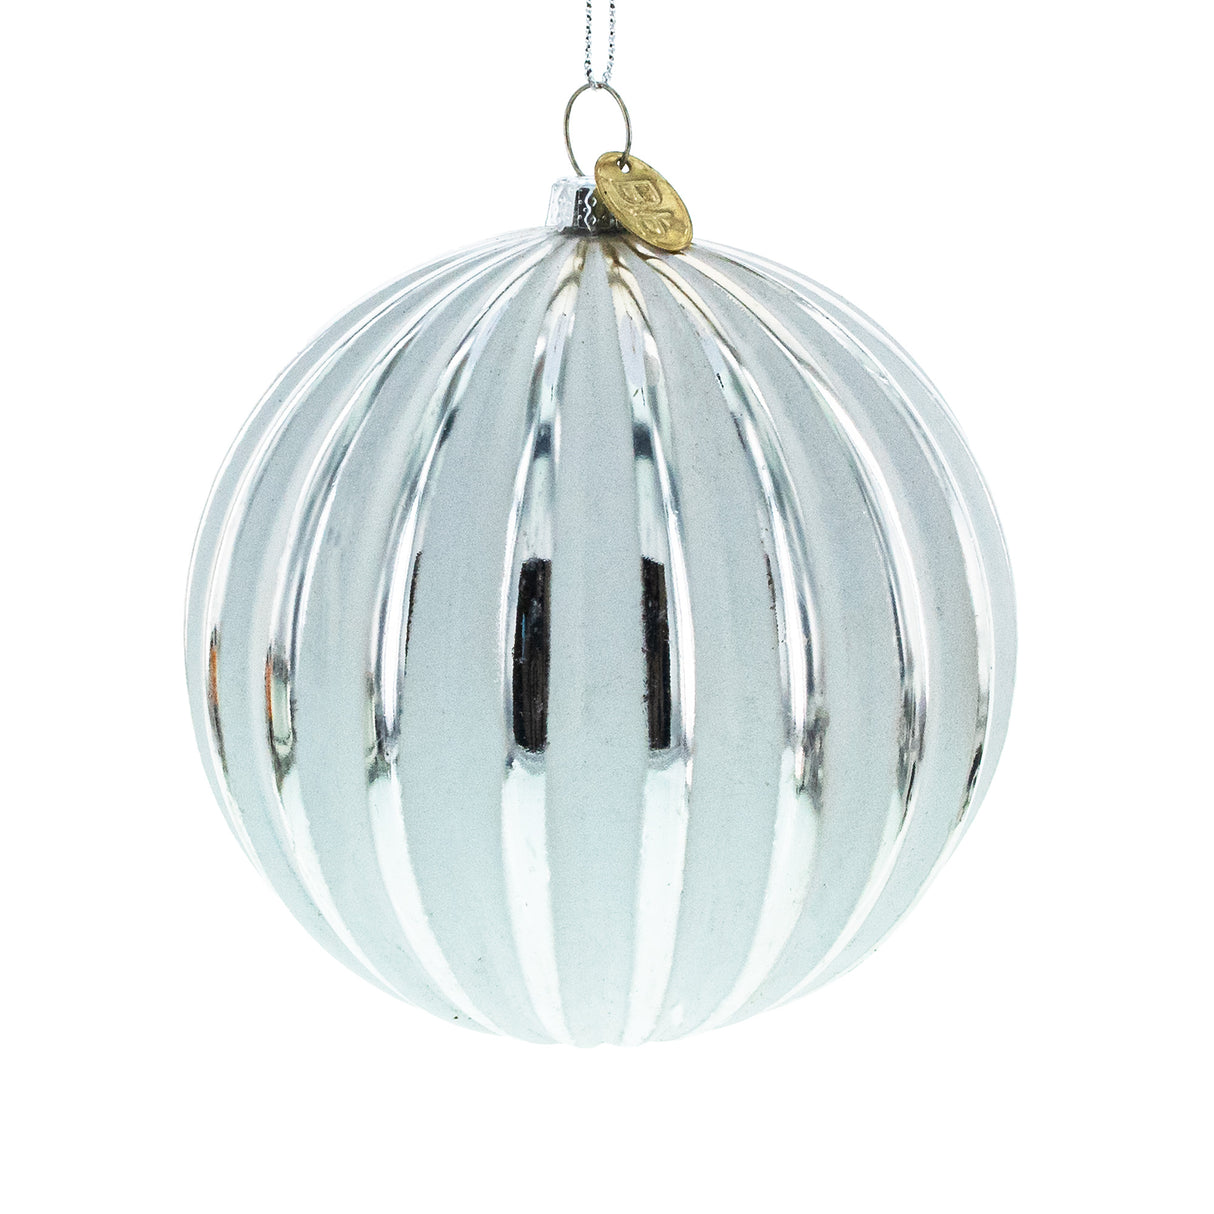 Gleaming Silver Ribbed - Blown Glass Christmas Ornament in White color, Round shape